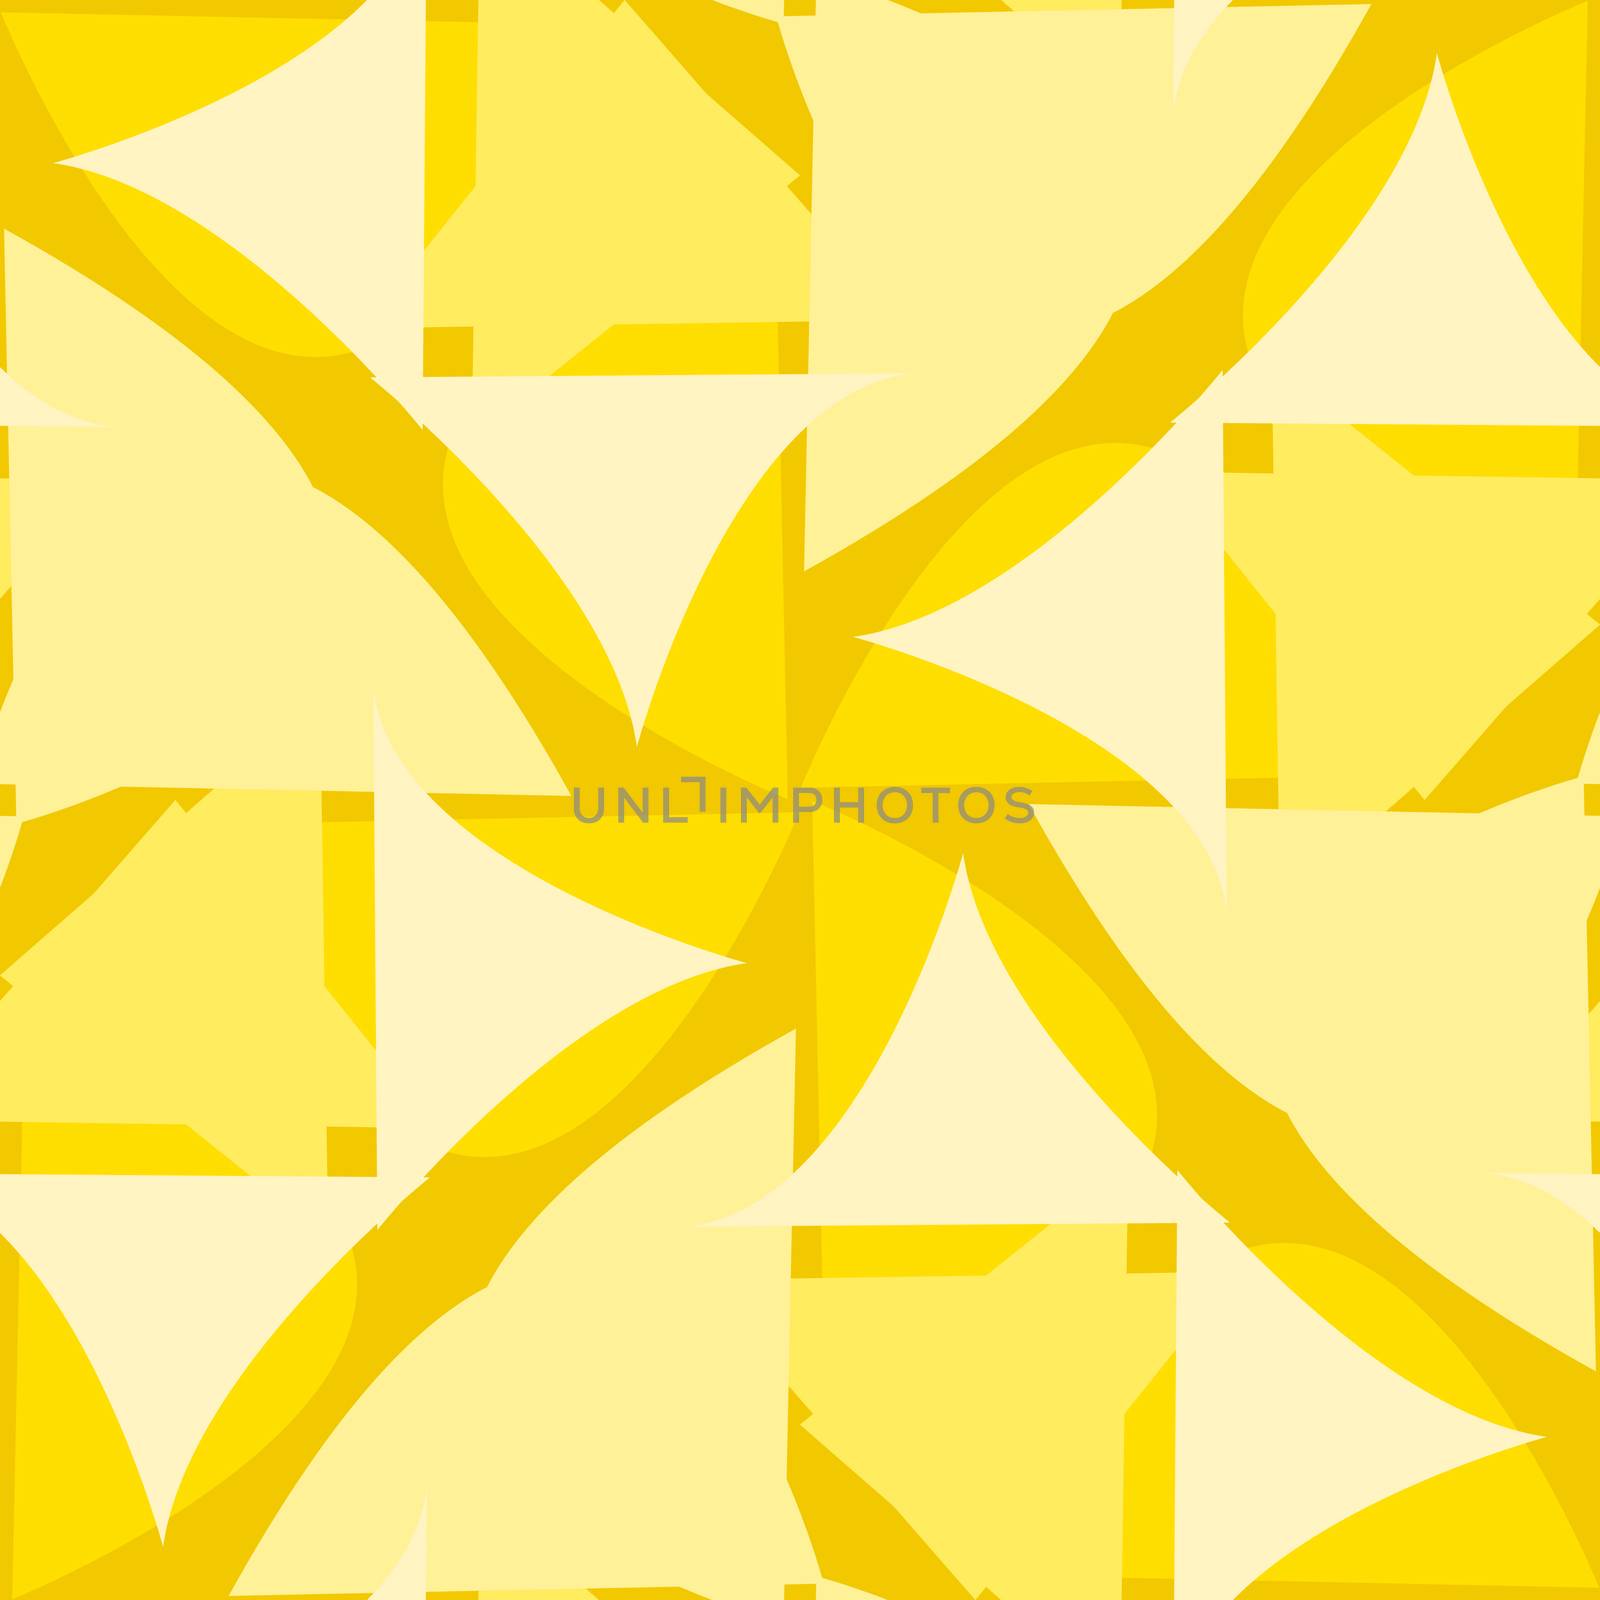 Abstract repeating background pattern of yellow triangular shapes